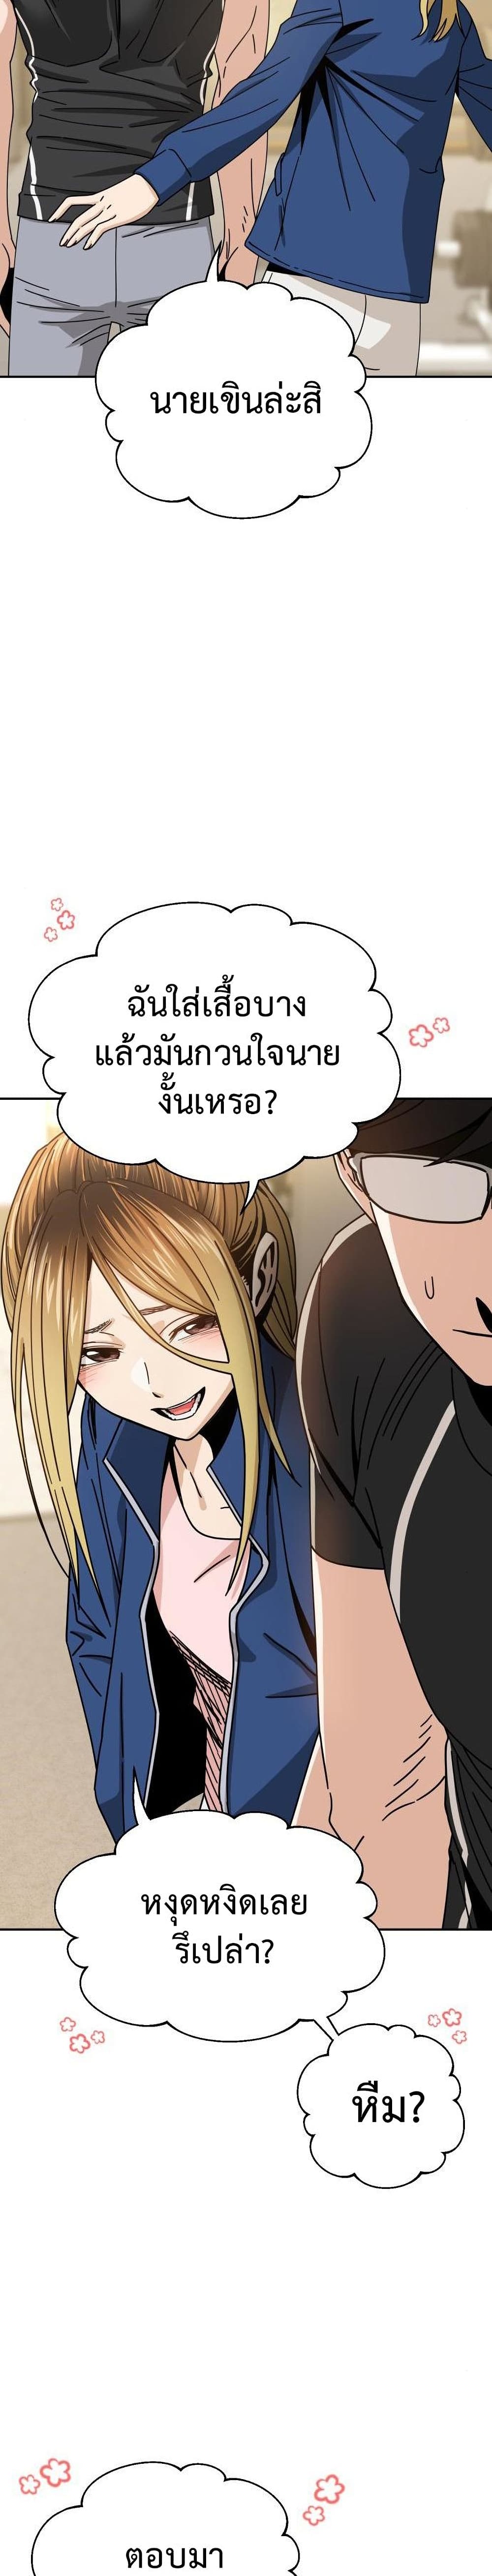 Match Made in Heaven by chance ตอนที่ 28 11